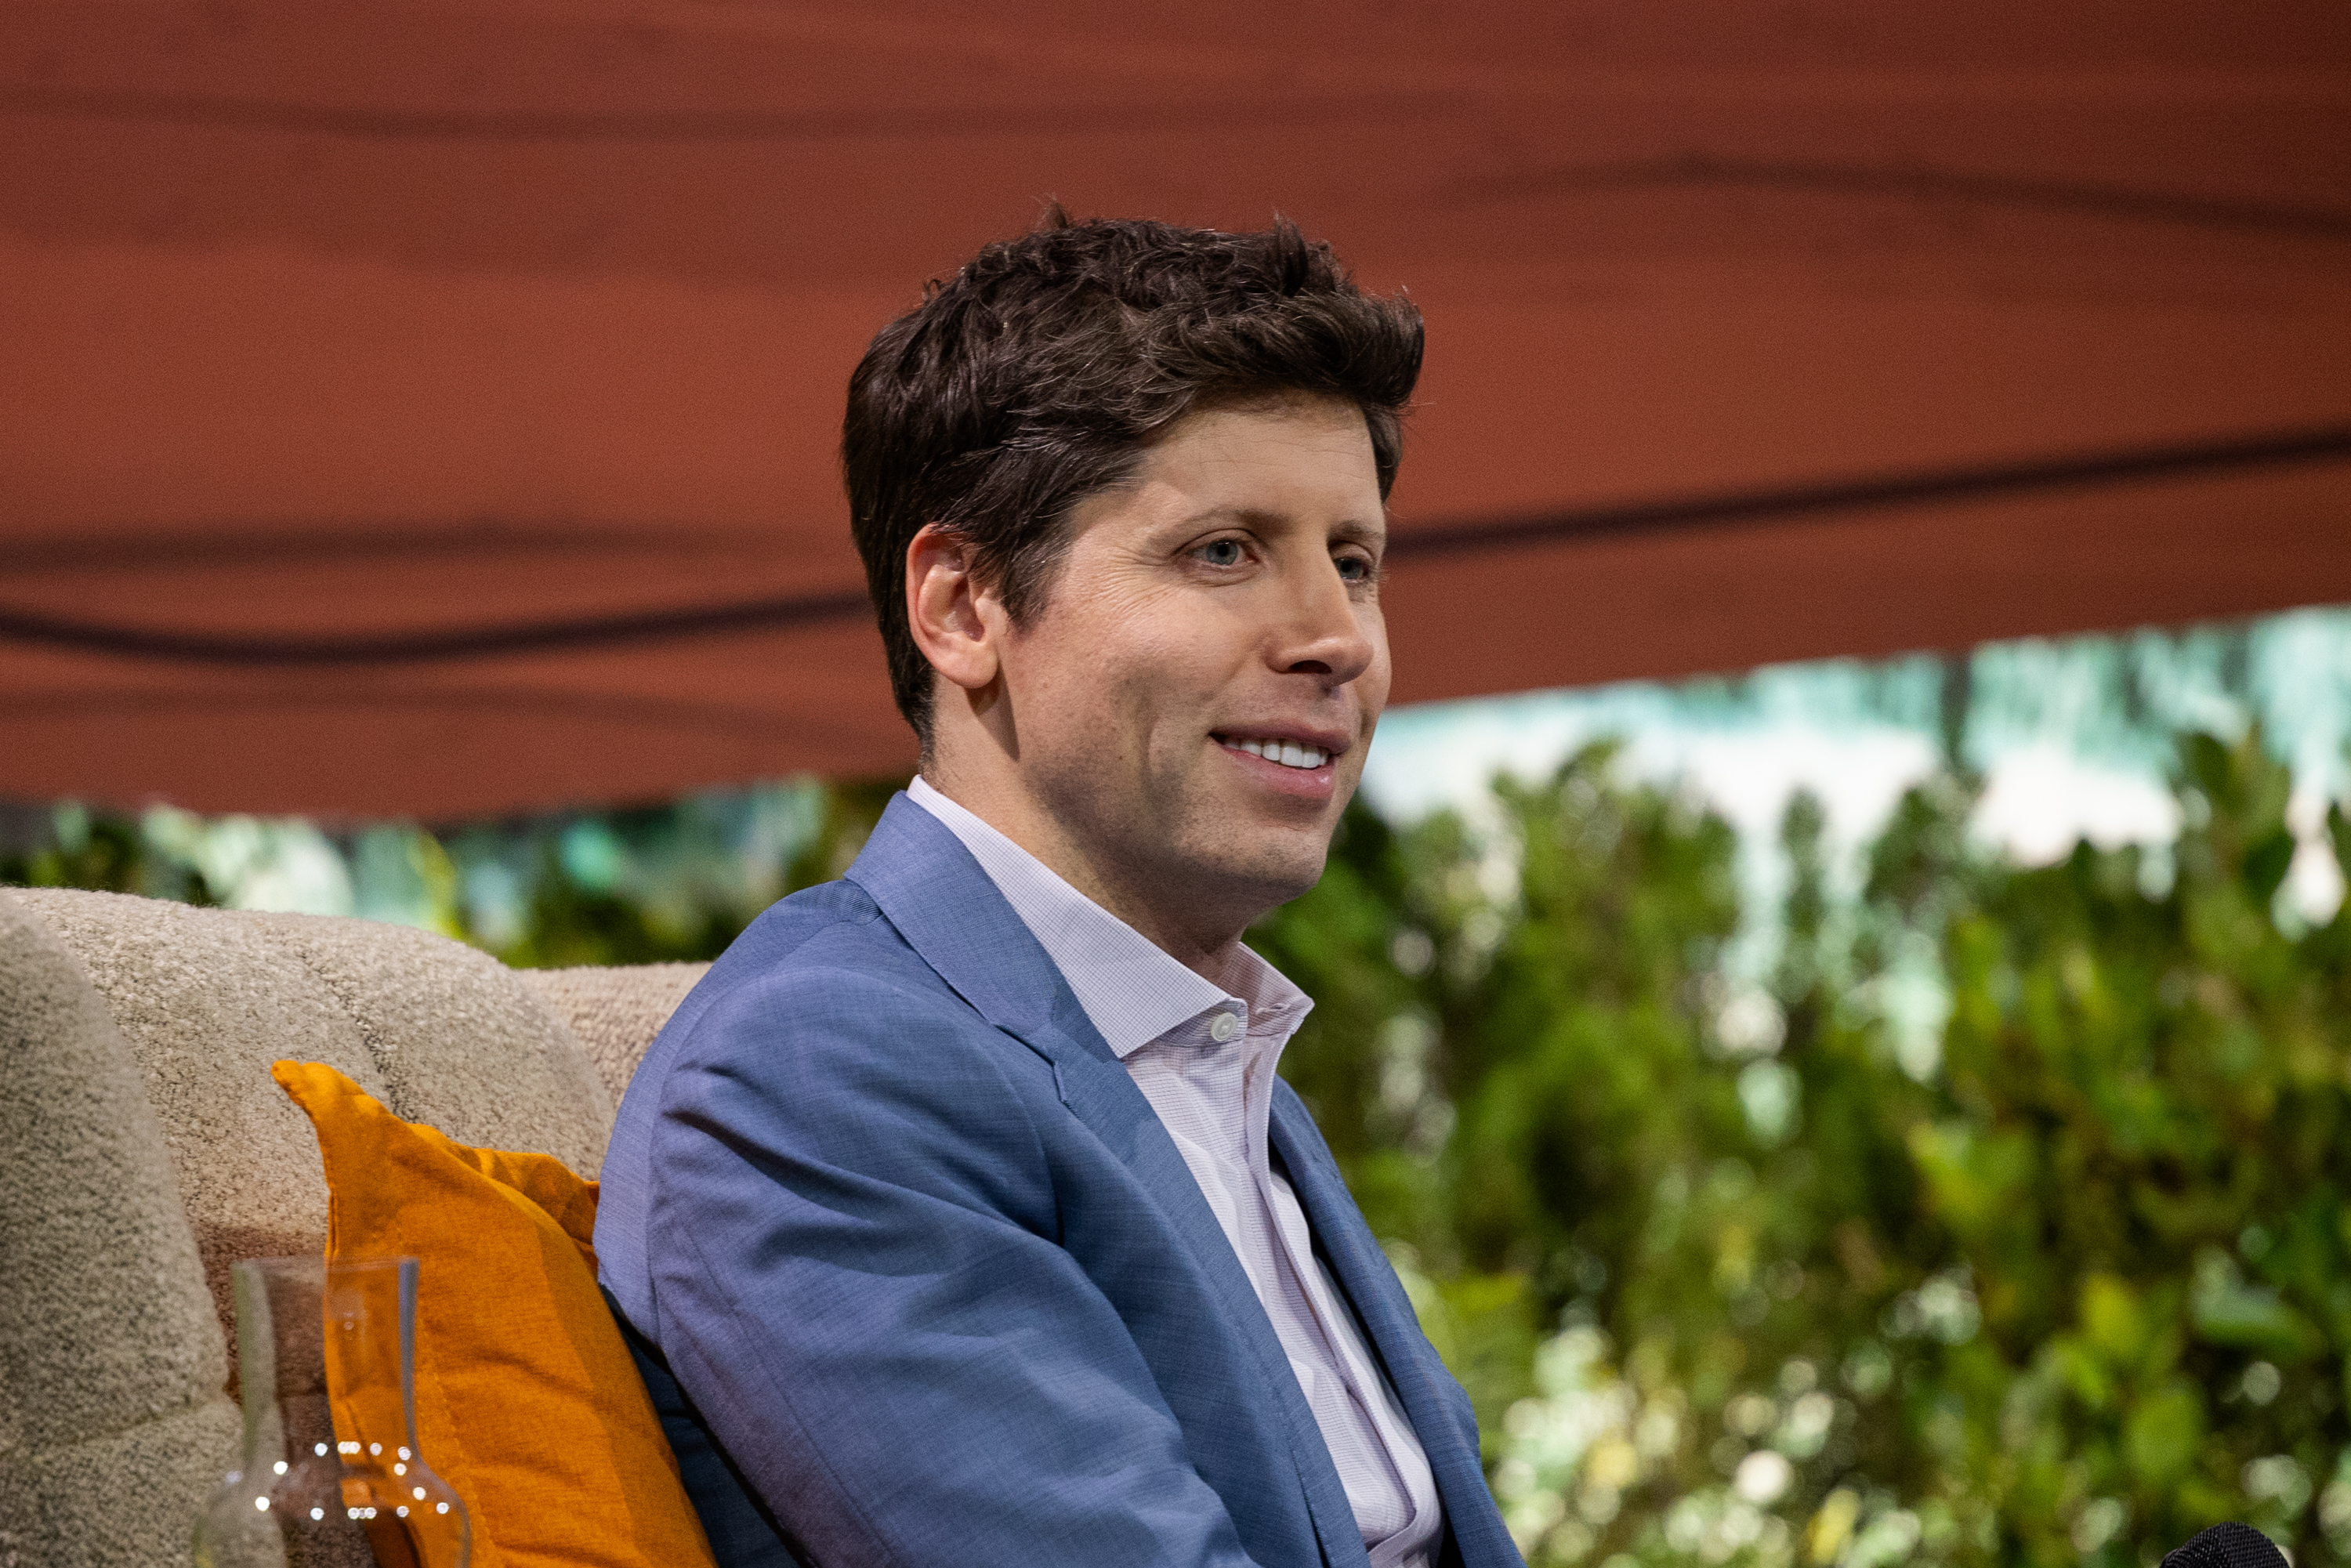 Former OpenAI Chief Executive Officer Sam Altman speaks at Dreamforce